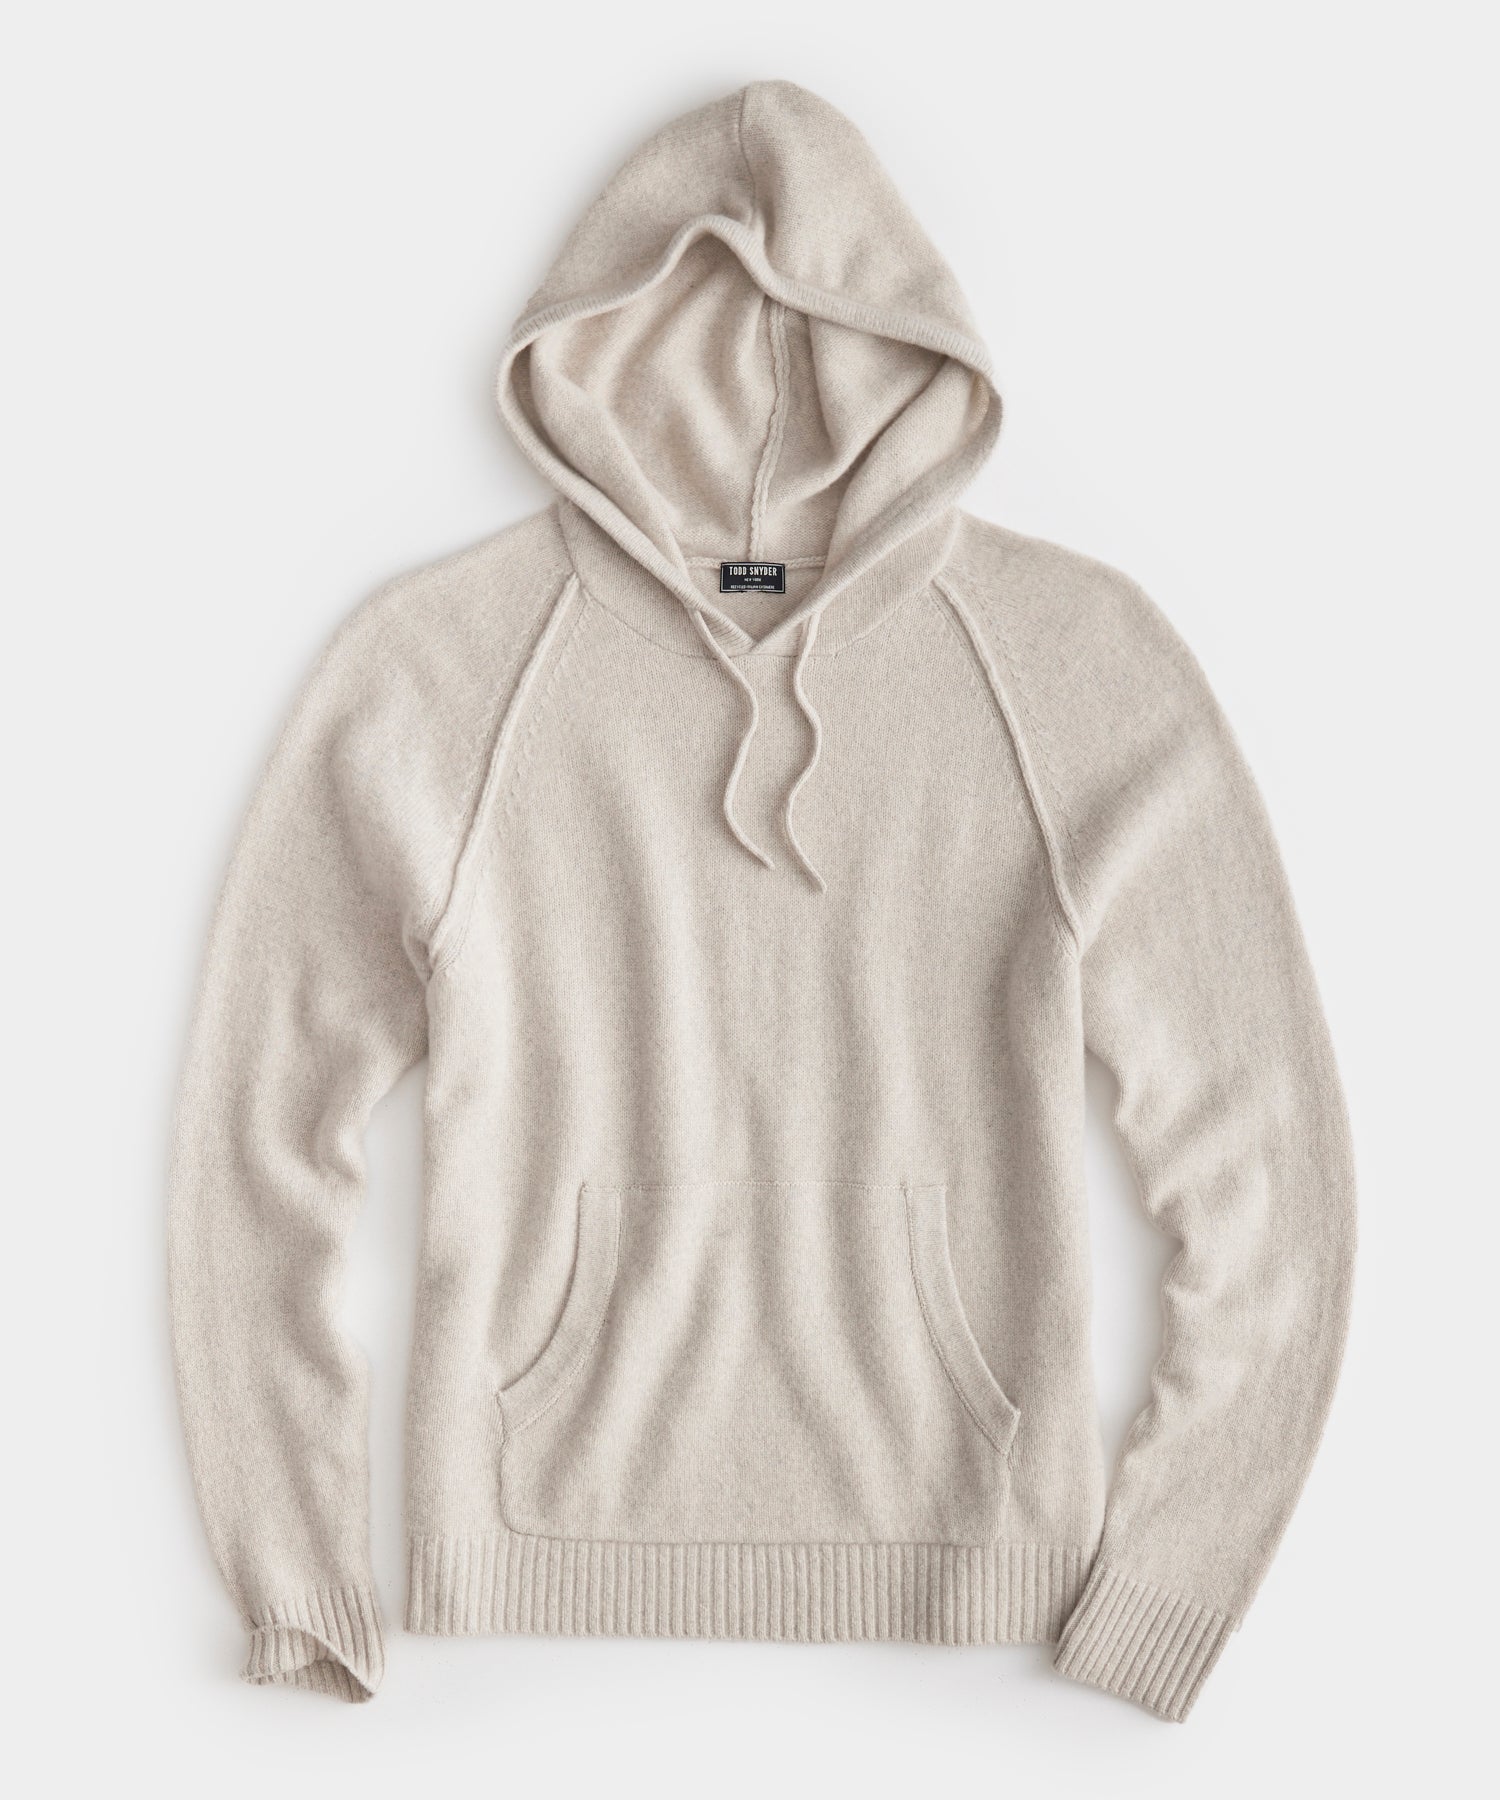 Nomad Cashmere Hoodie in Heather Grey